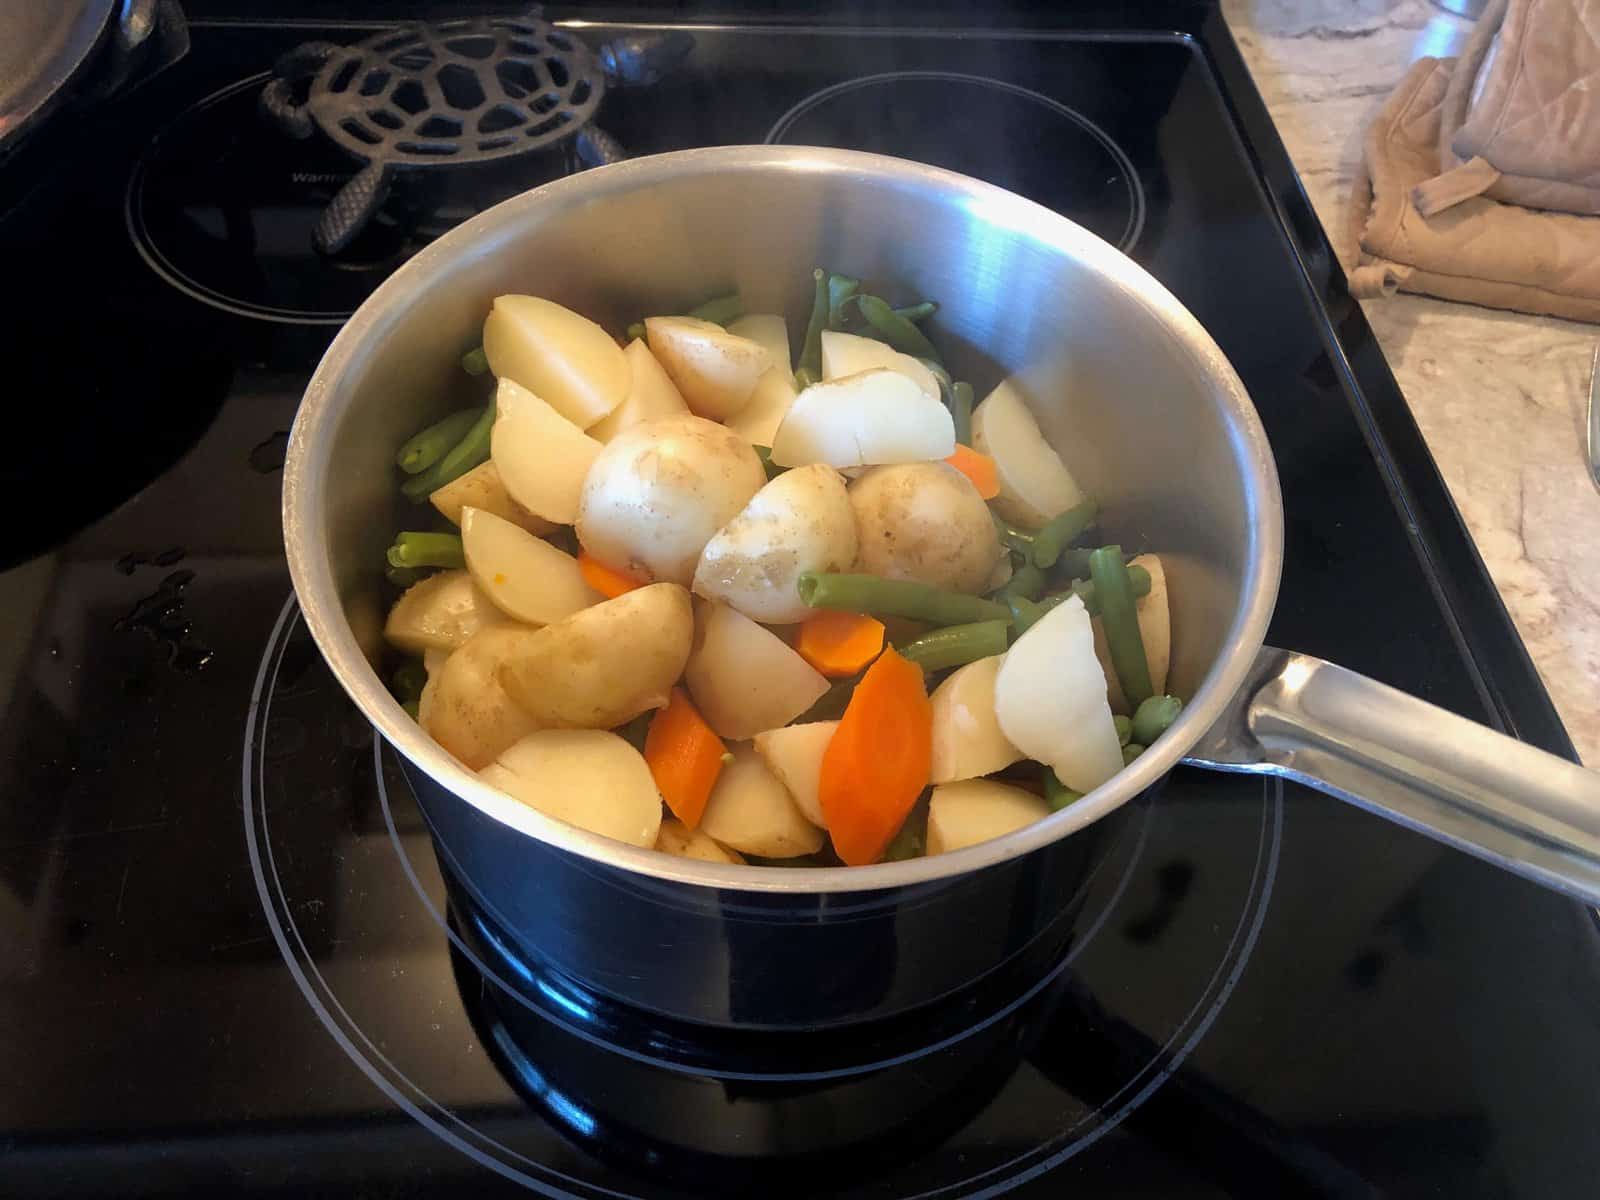 green beans, carrots and new potatoes in a stainless steel pot on the stove